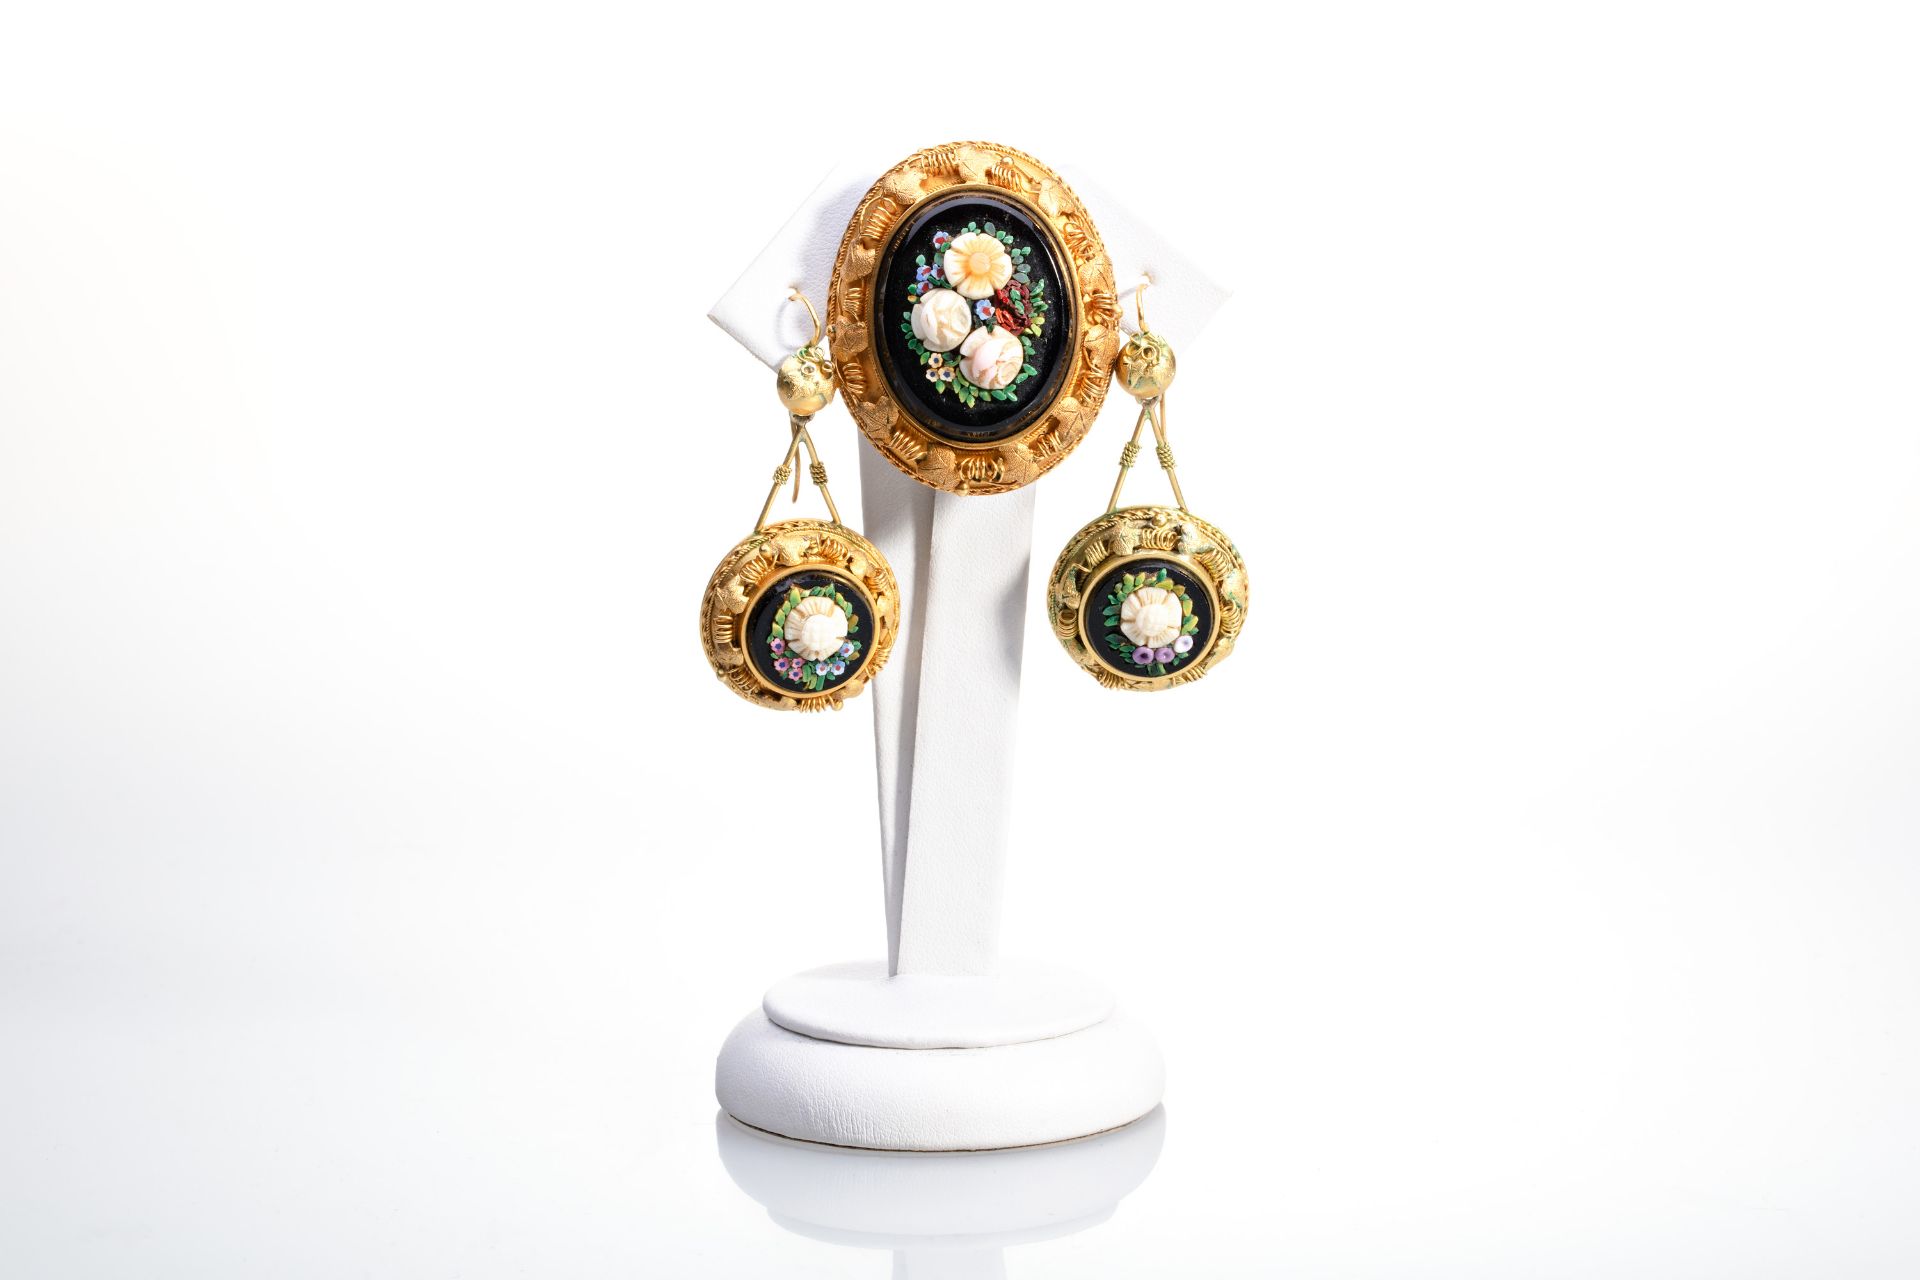 GOLD EARRINGS AND BROOCH WITH MICRO MOSAIC | (European - 19th century)